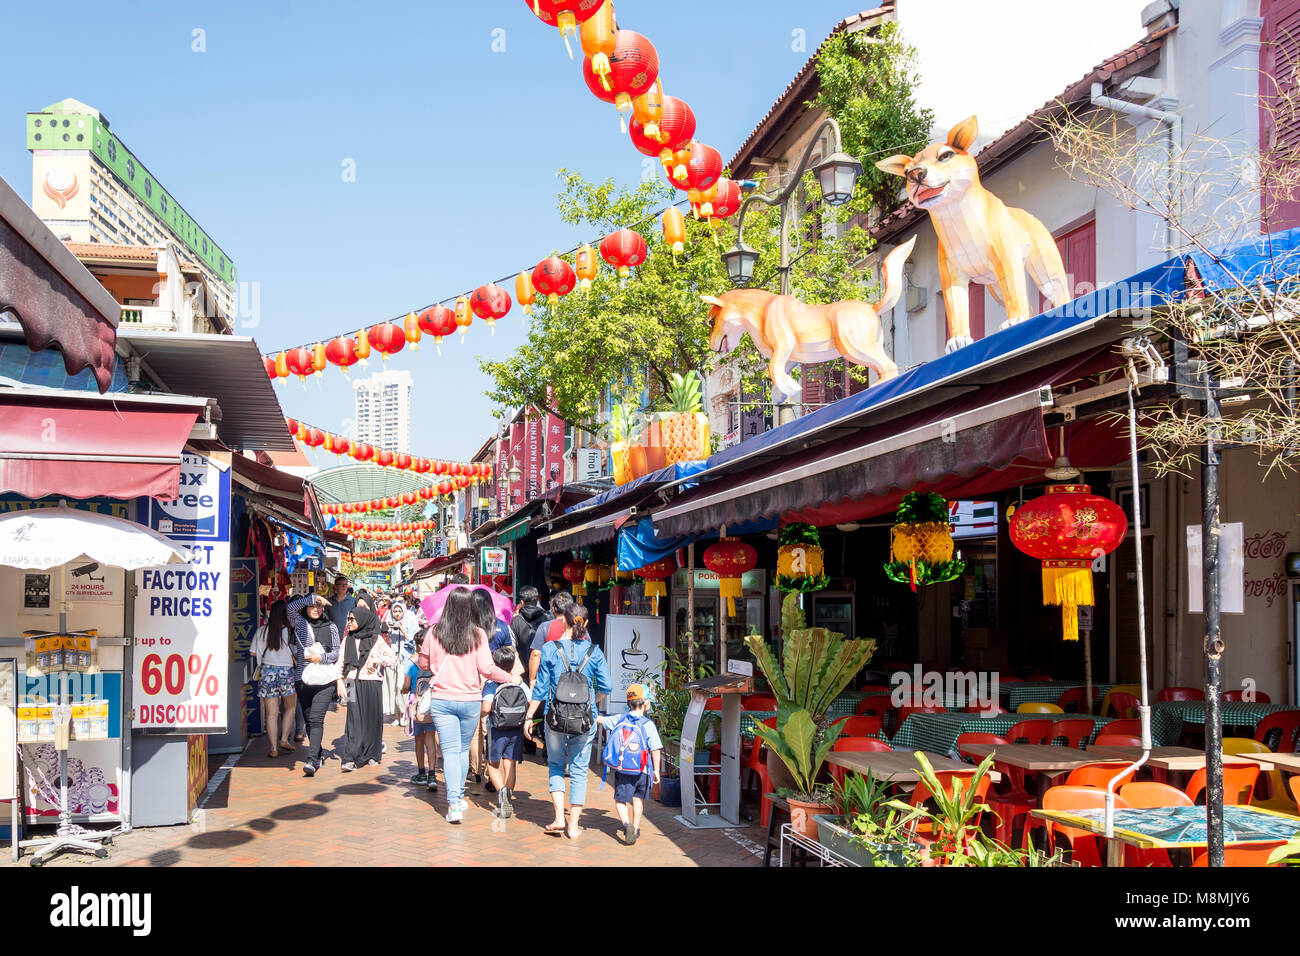 Shops and restaurants on Pagoda Street, Chinatown, Outram District, Central Area, Singapore Island (Pulau Ujong), Singapore Stock Photo